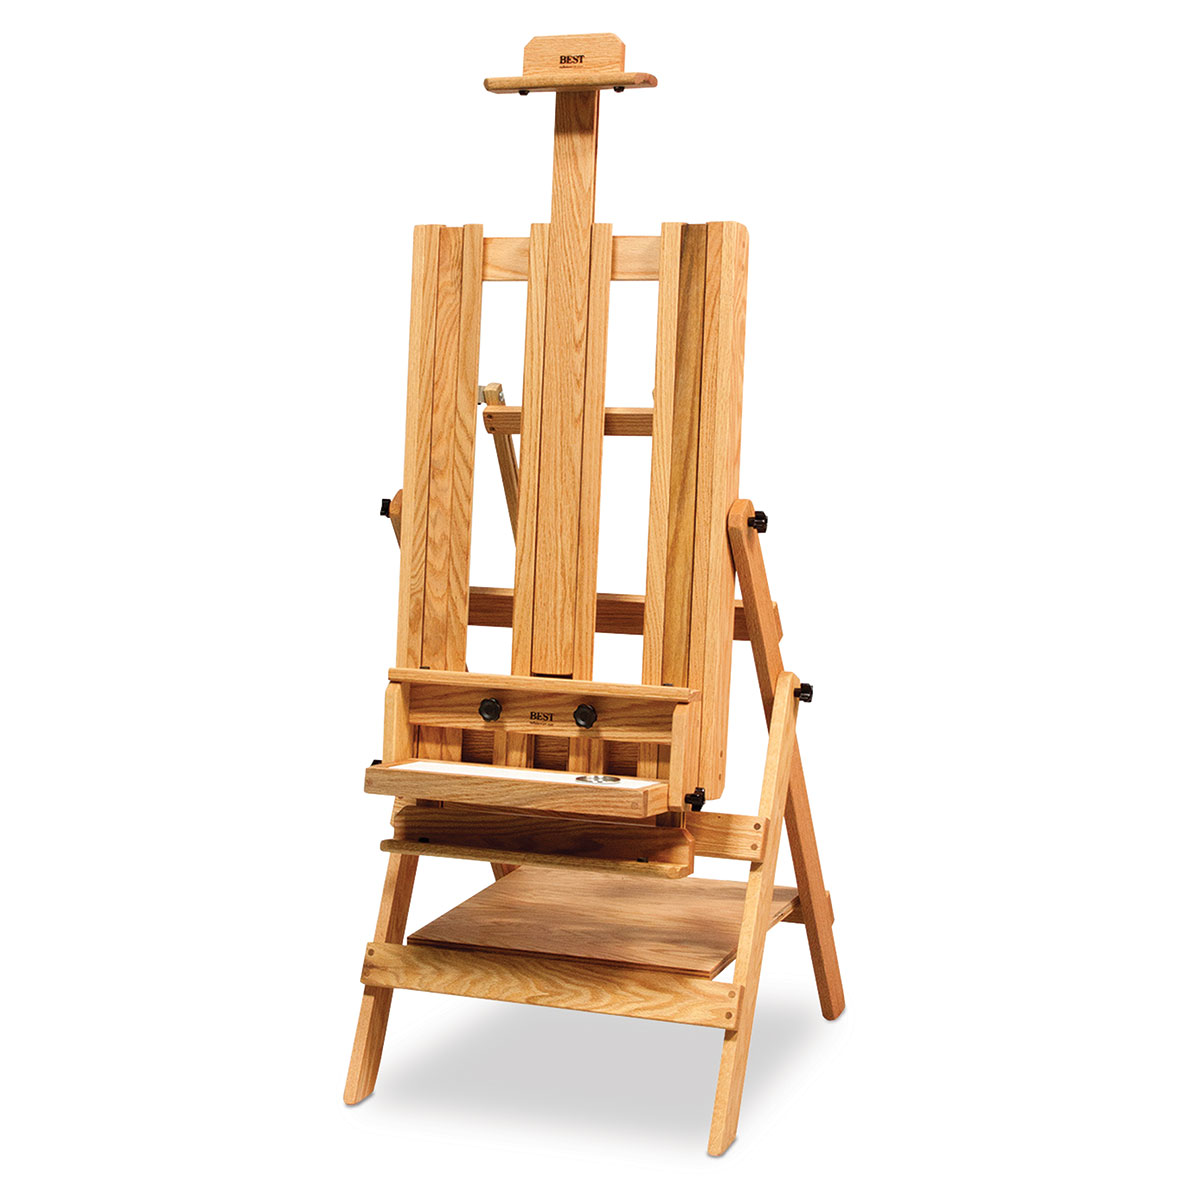 Richeson : Portable Collapsible Easel - Richeson - Brands